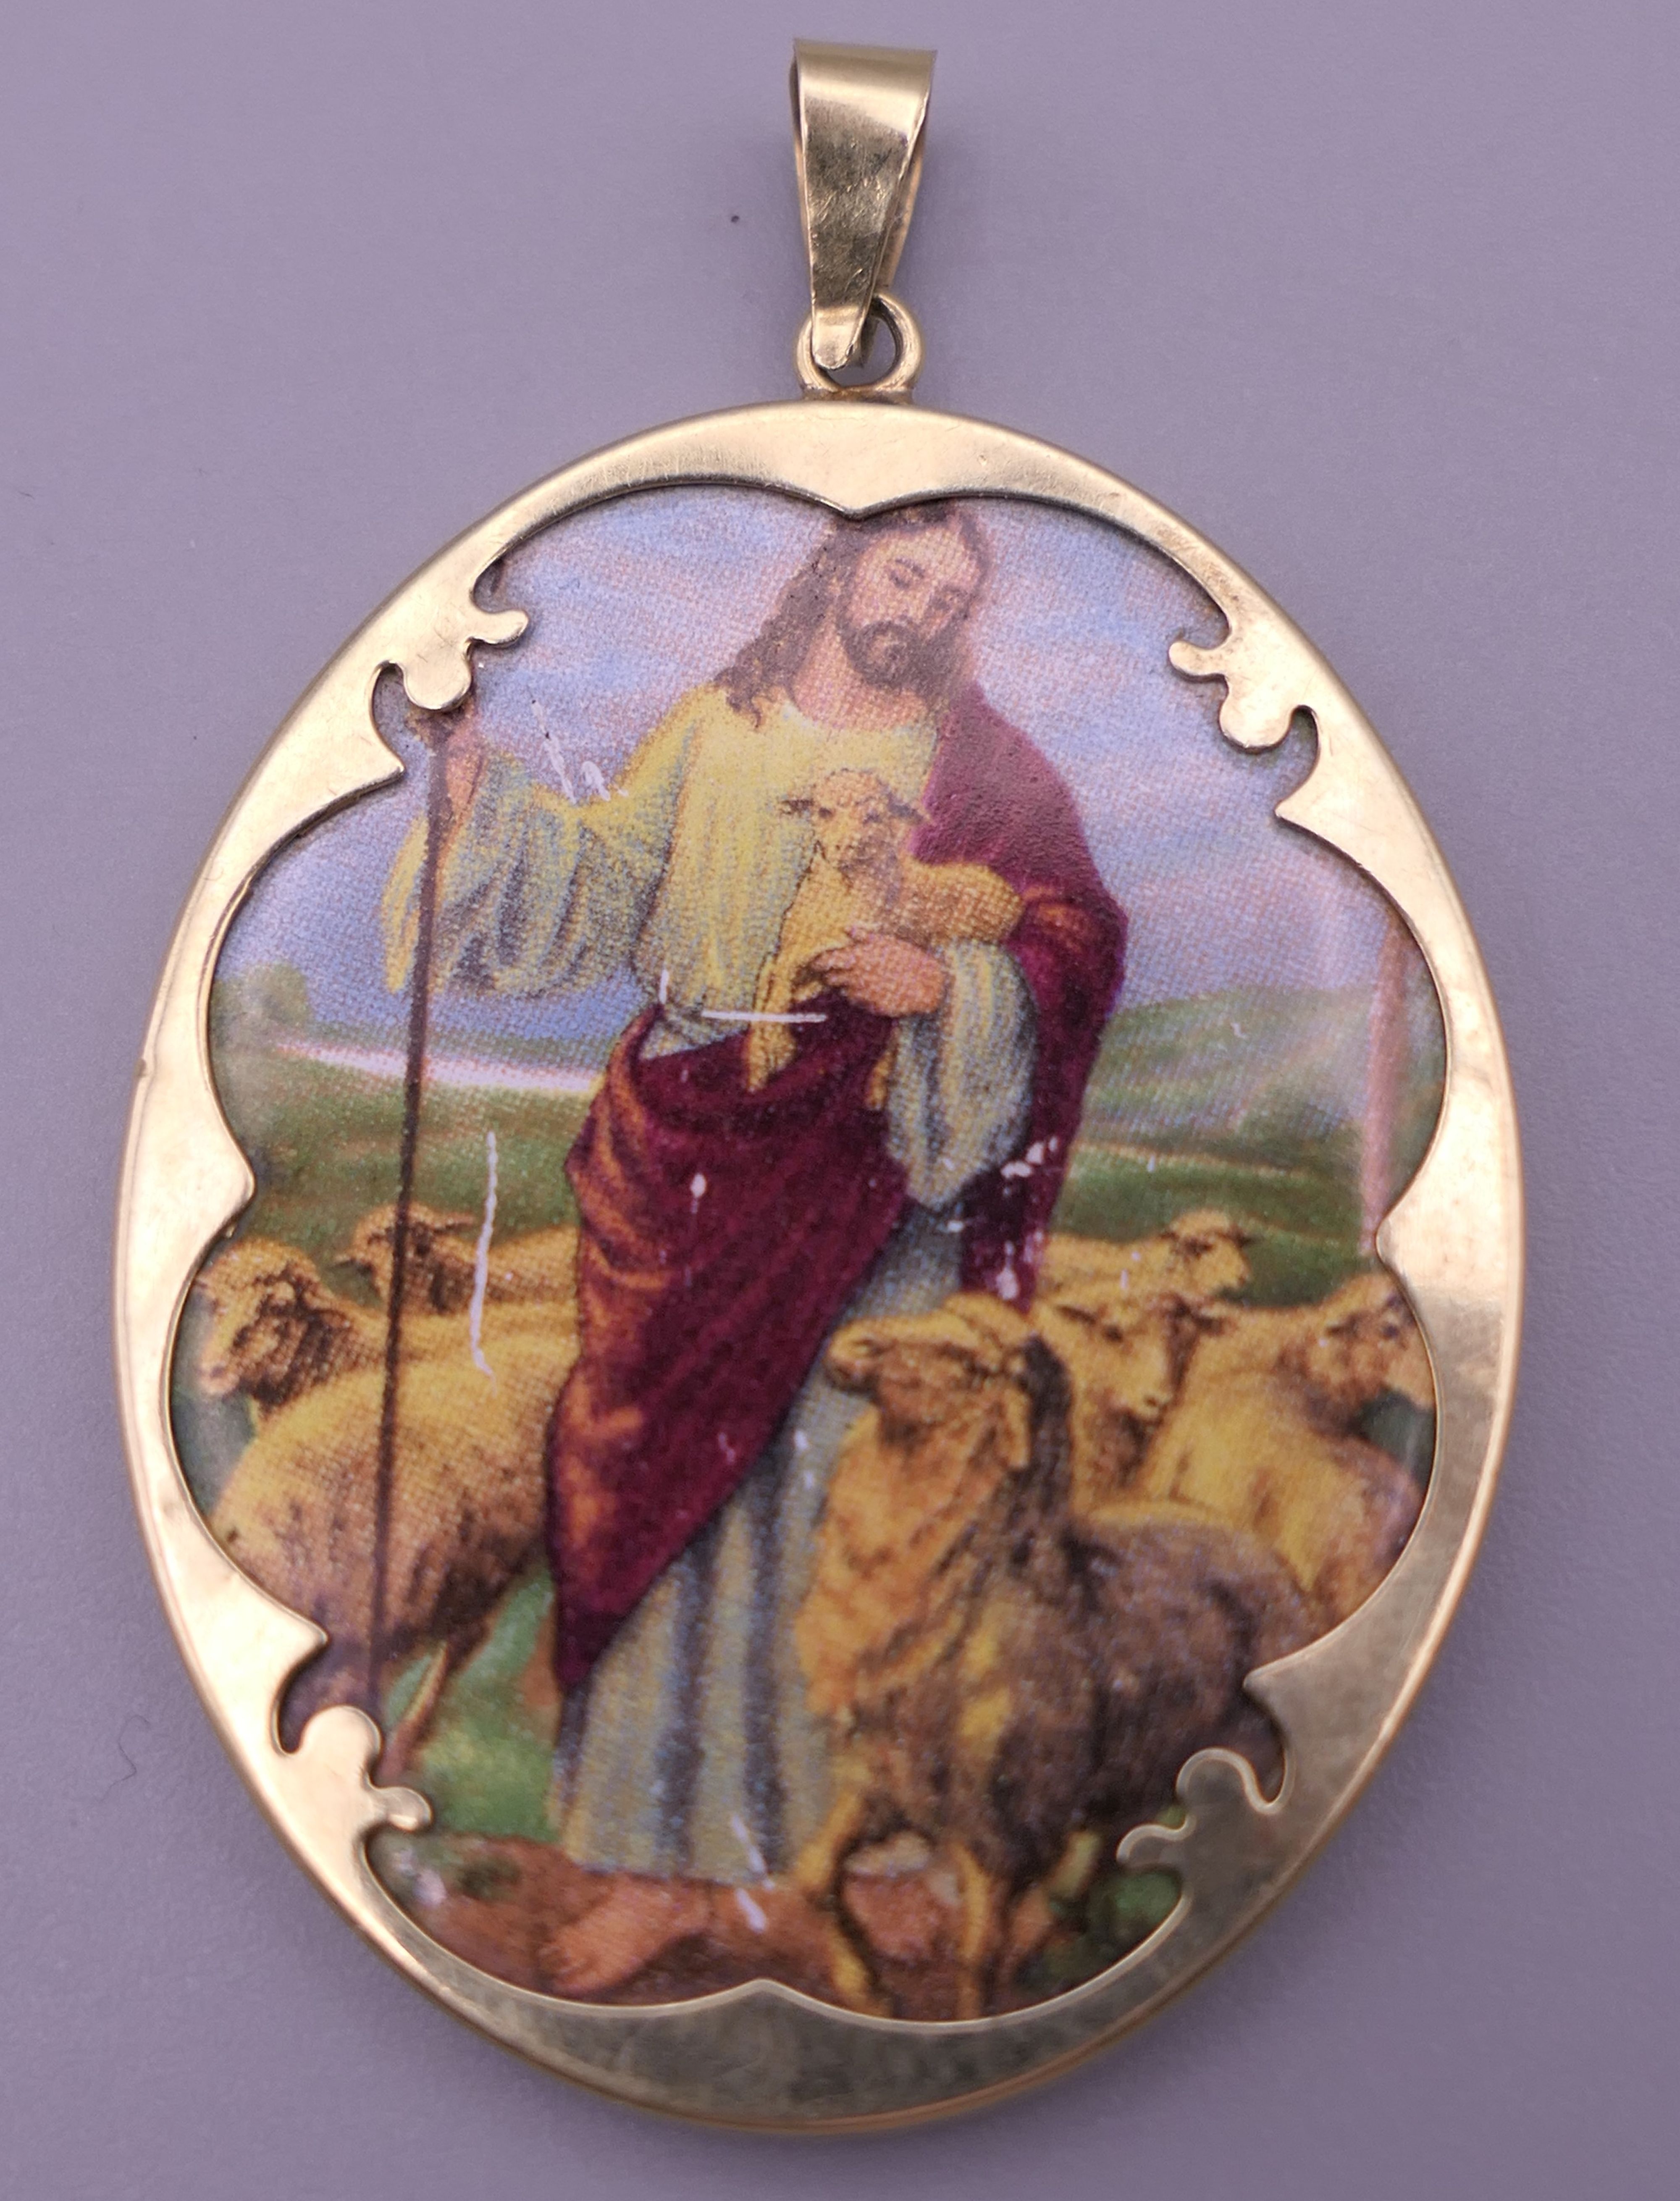 A 14 ct gold mounted pendant depicting Jesus. 4.5 cm high.